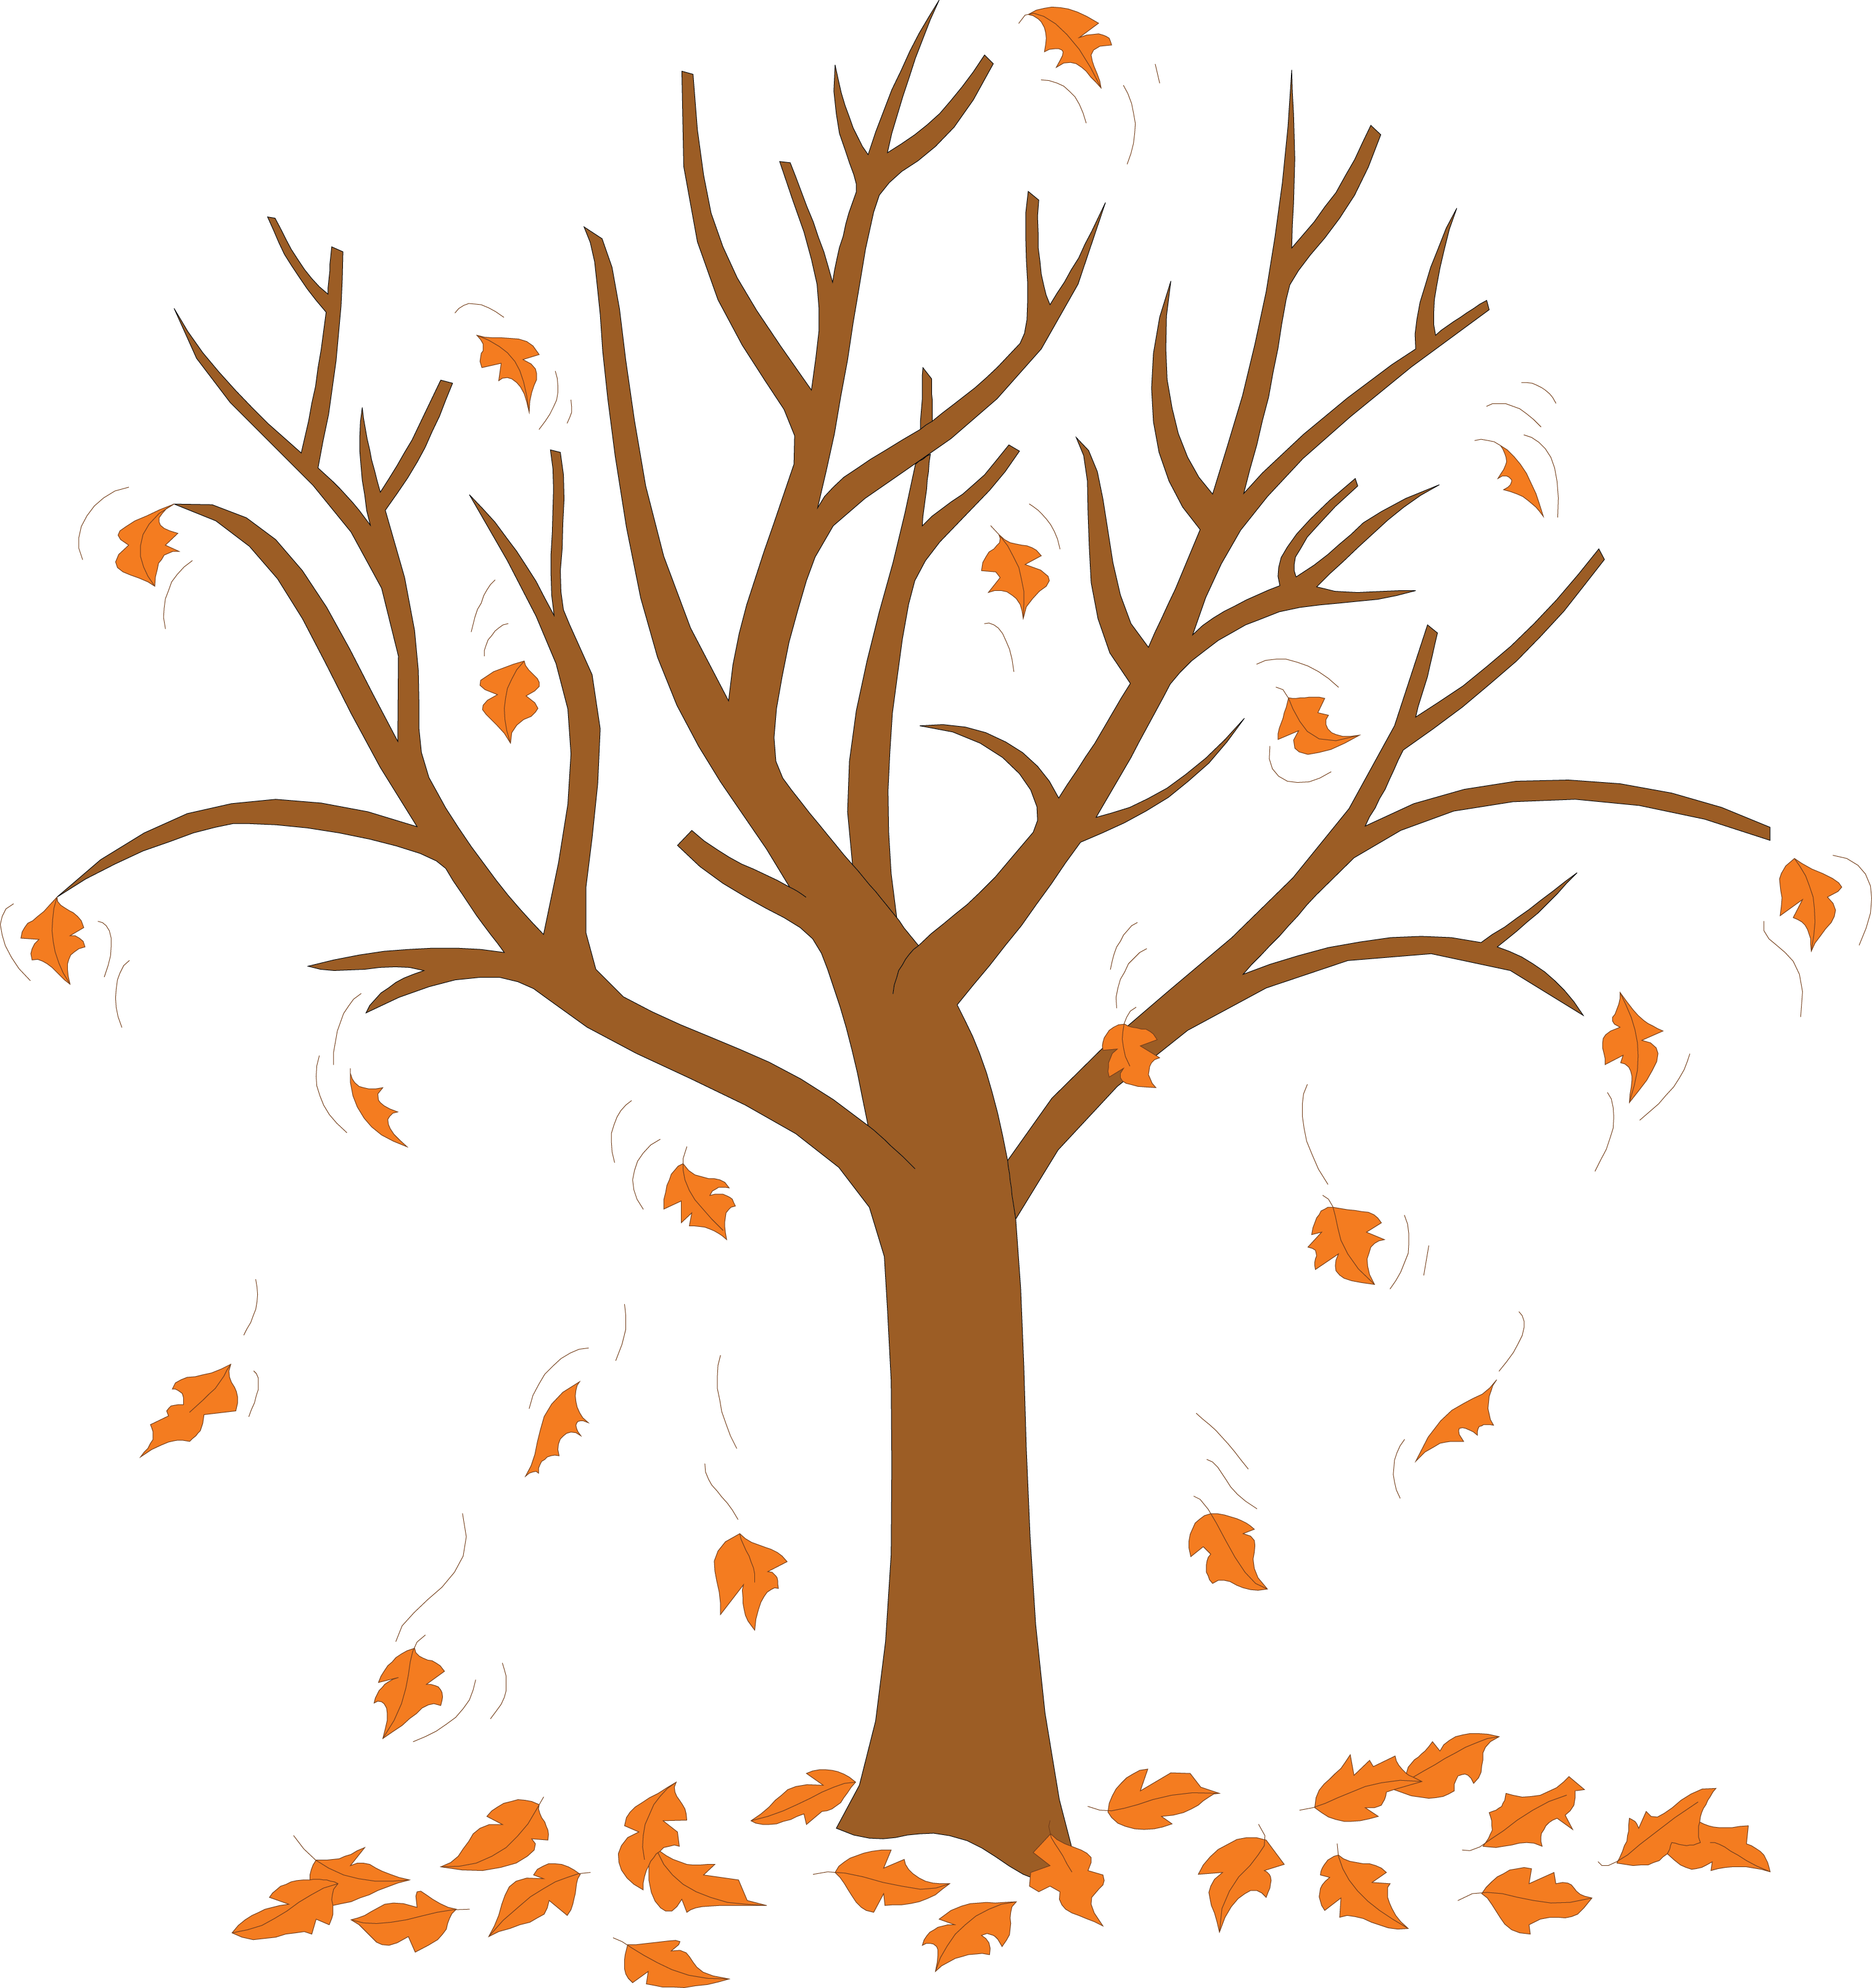 Clip Art Tree With Falling Leaves Clipart